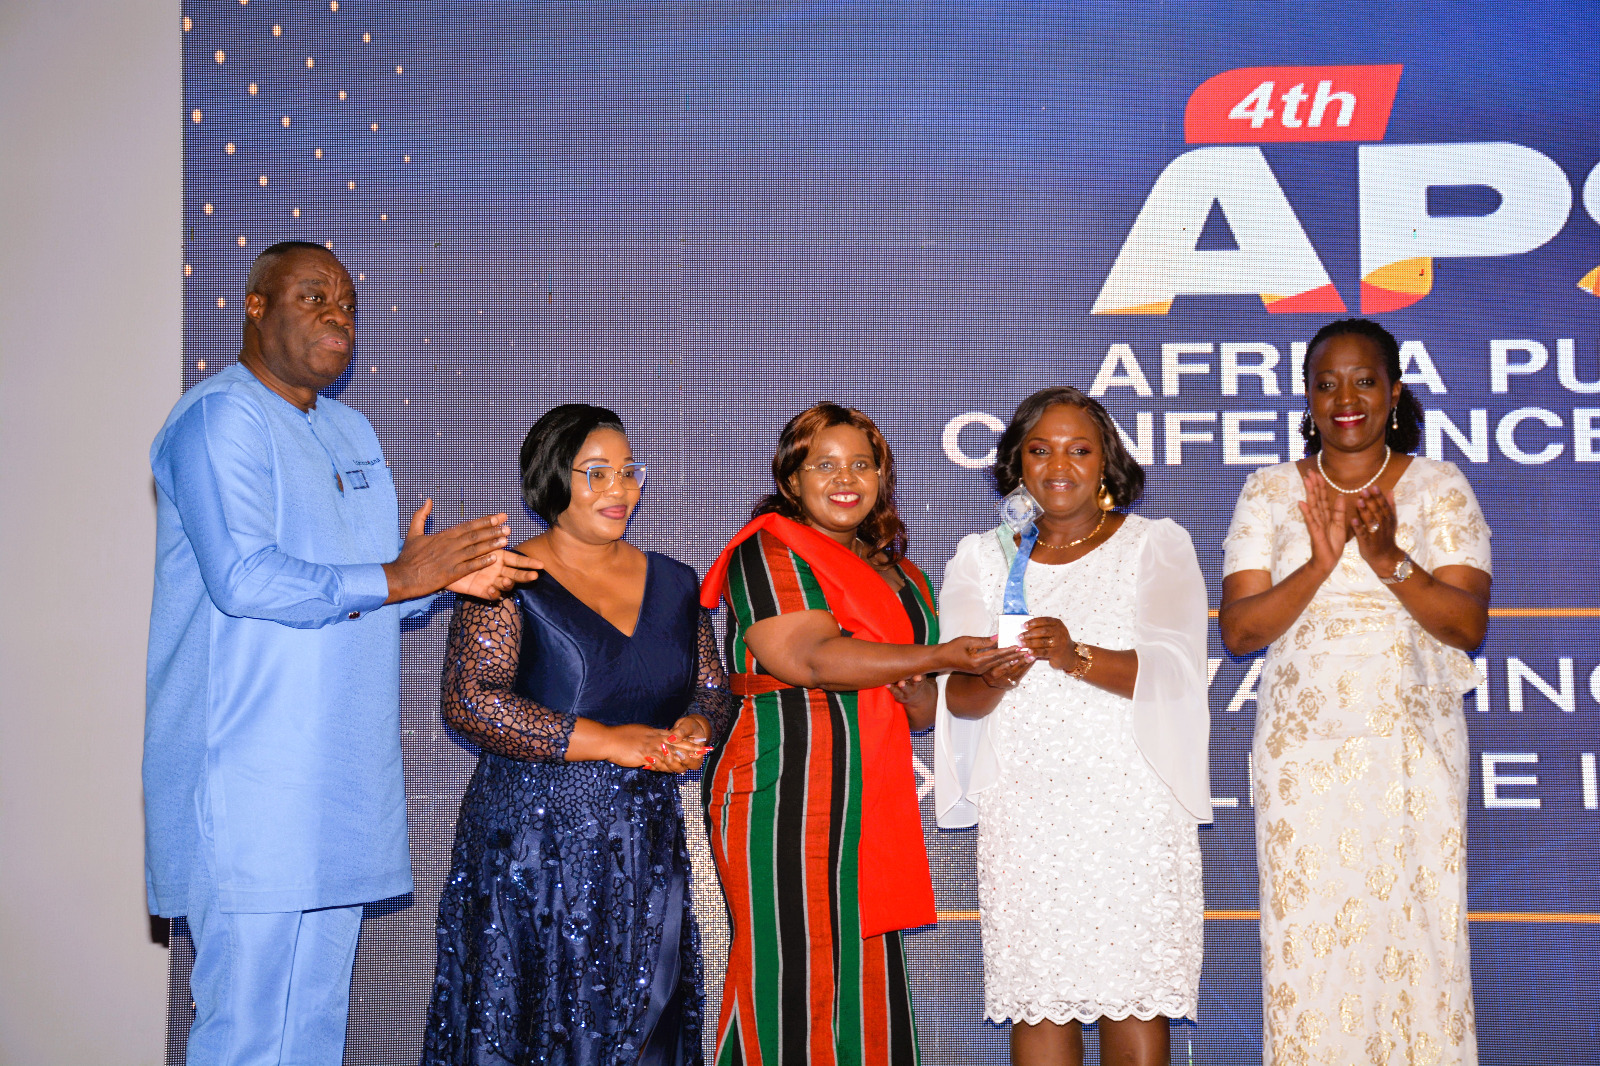 The Cabinet Secretary for Tourism, Wildlife and Heritage, Hon. Peninah Malonza (3rd from left), being awarded the Africa Tourism of the Year award by the Second Lady of the Republic of Kenya, H.E pastor Dr. Dorcas Rigathi (2nd from right).